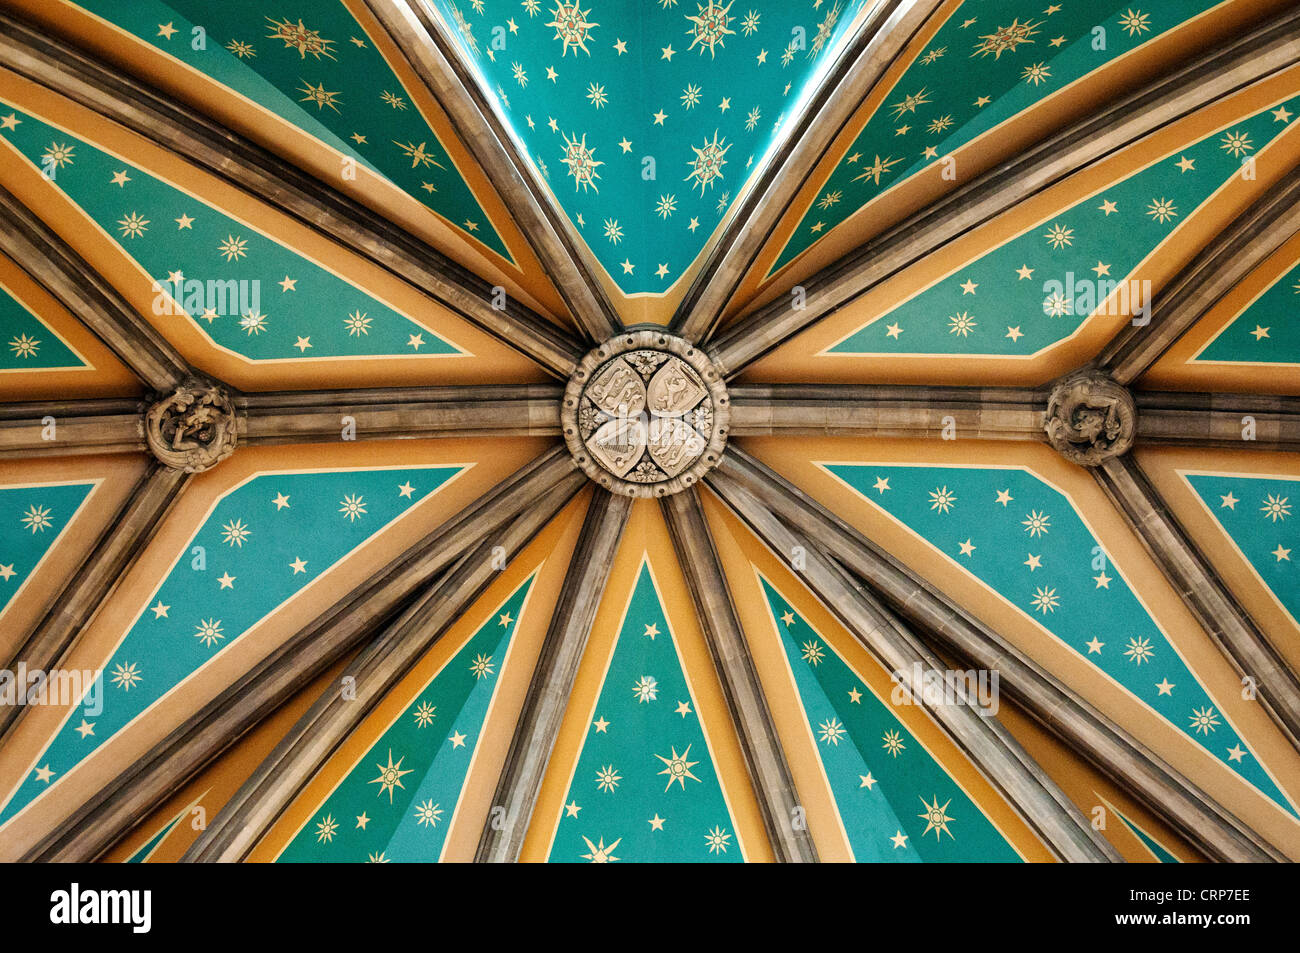 Ceiling above the Grand staircase in the St Pancras Renaissance Hotel. Stock Photo